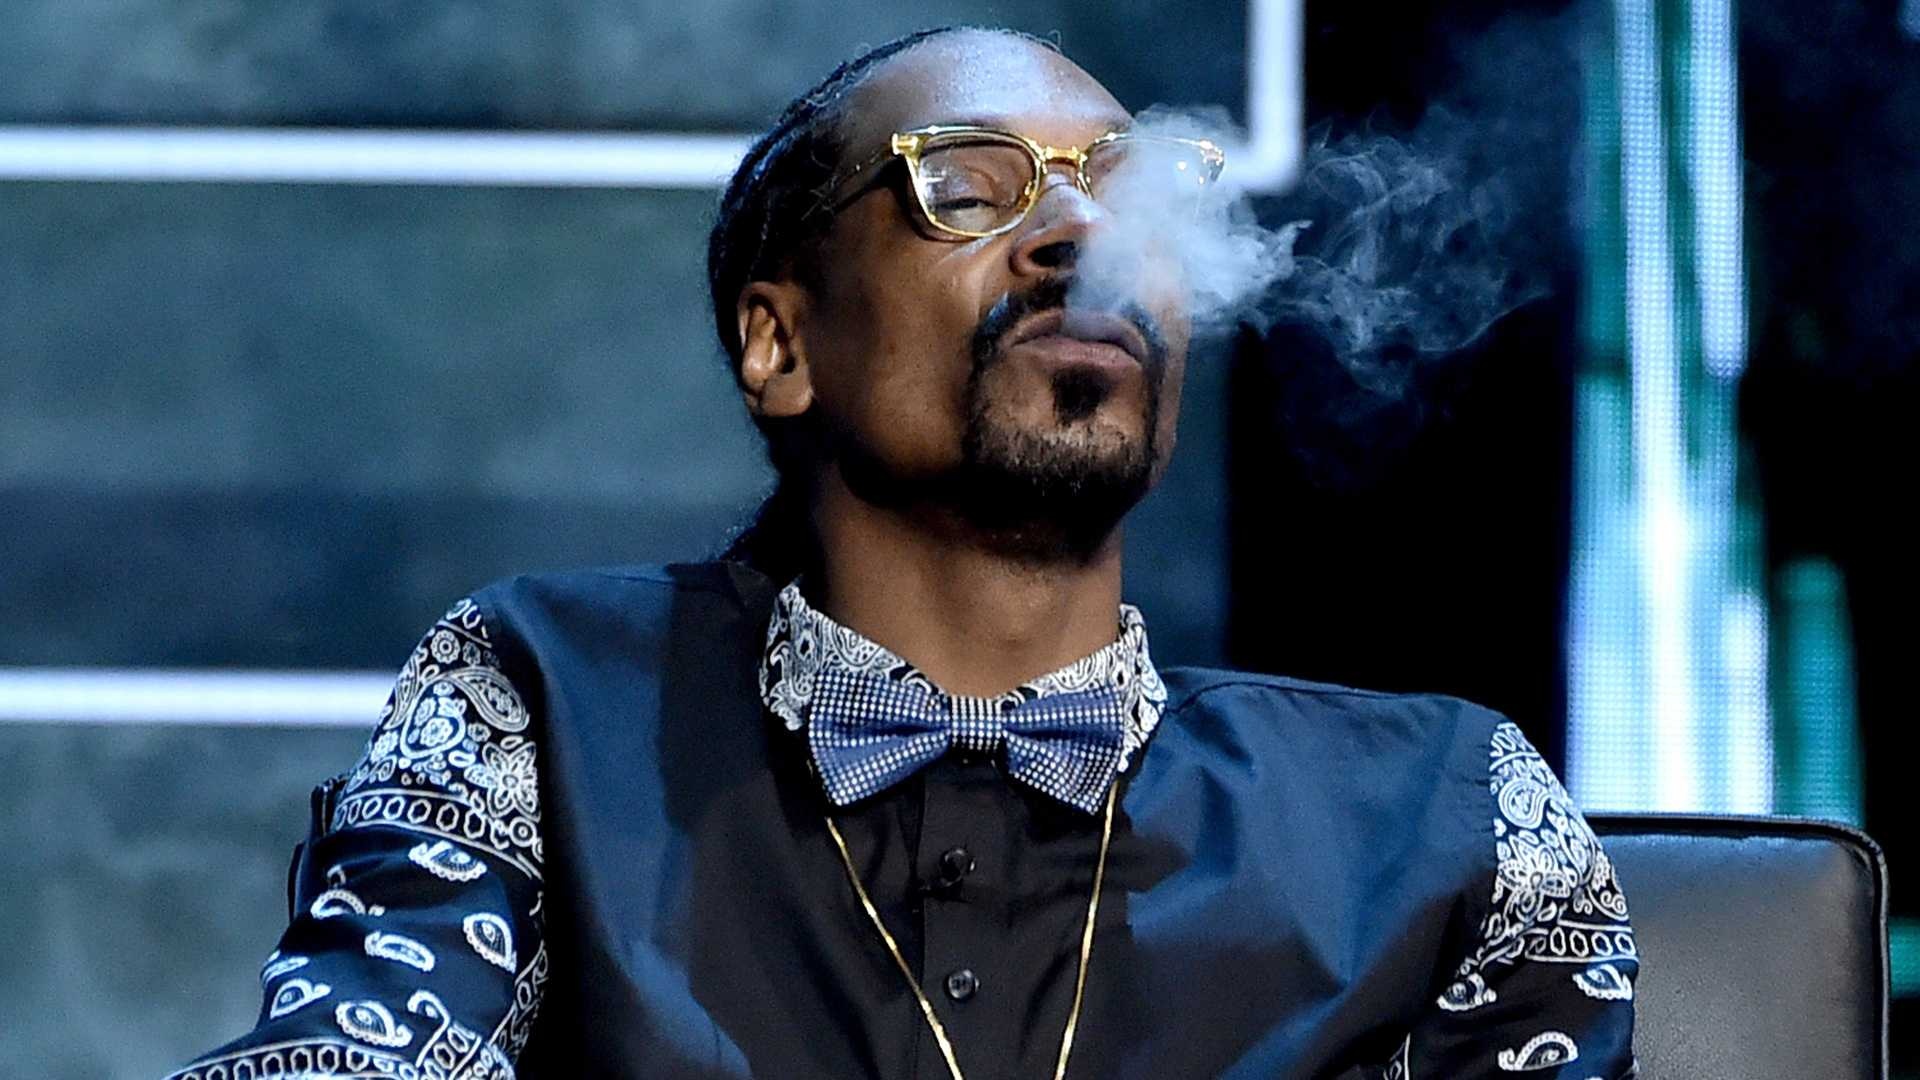 Snoop Dogg, Weed enthusiast, Dedicated website, GQ India feature, 1920x1080 Full HD Desktop